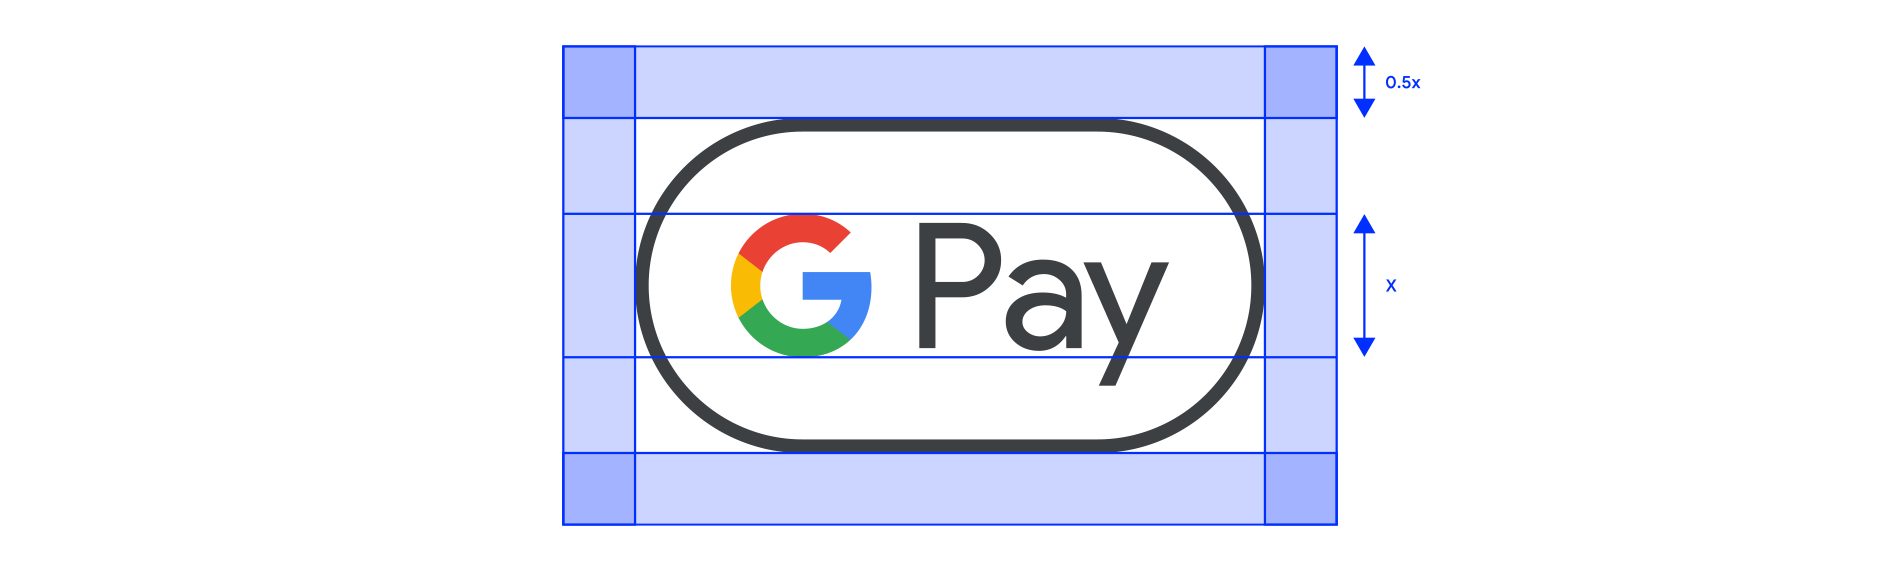 Google Pay mark clear space example